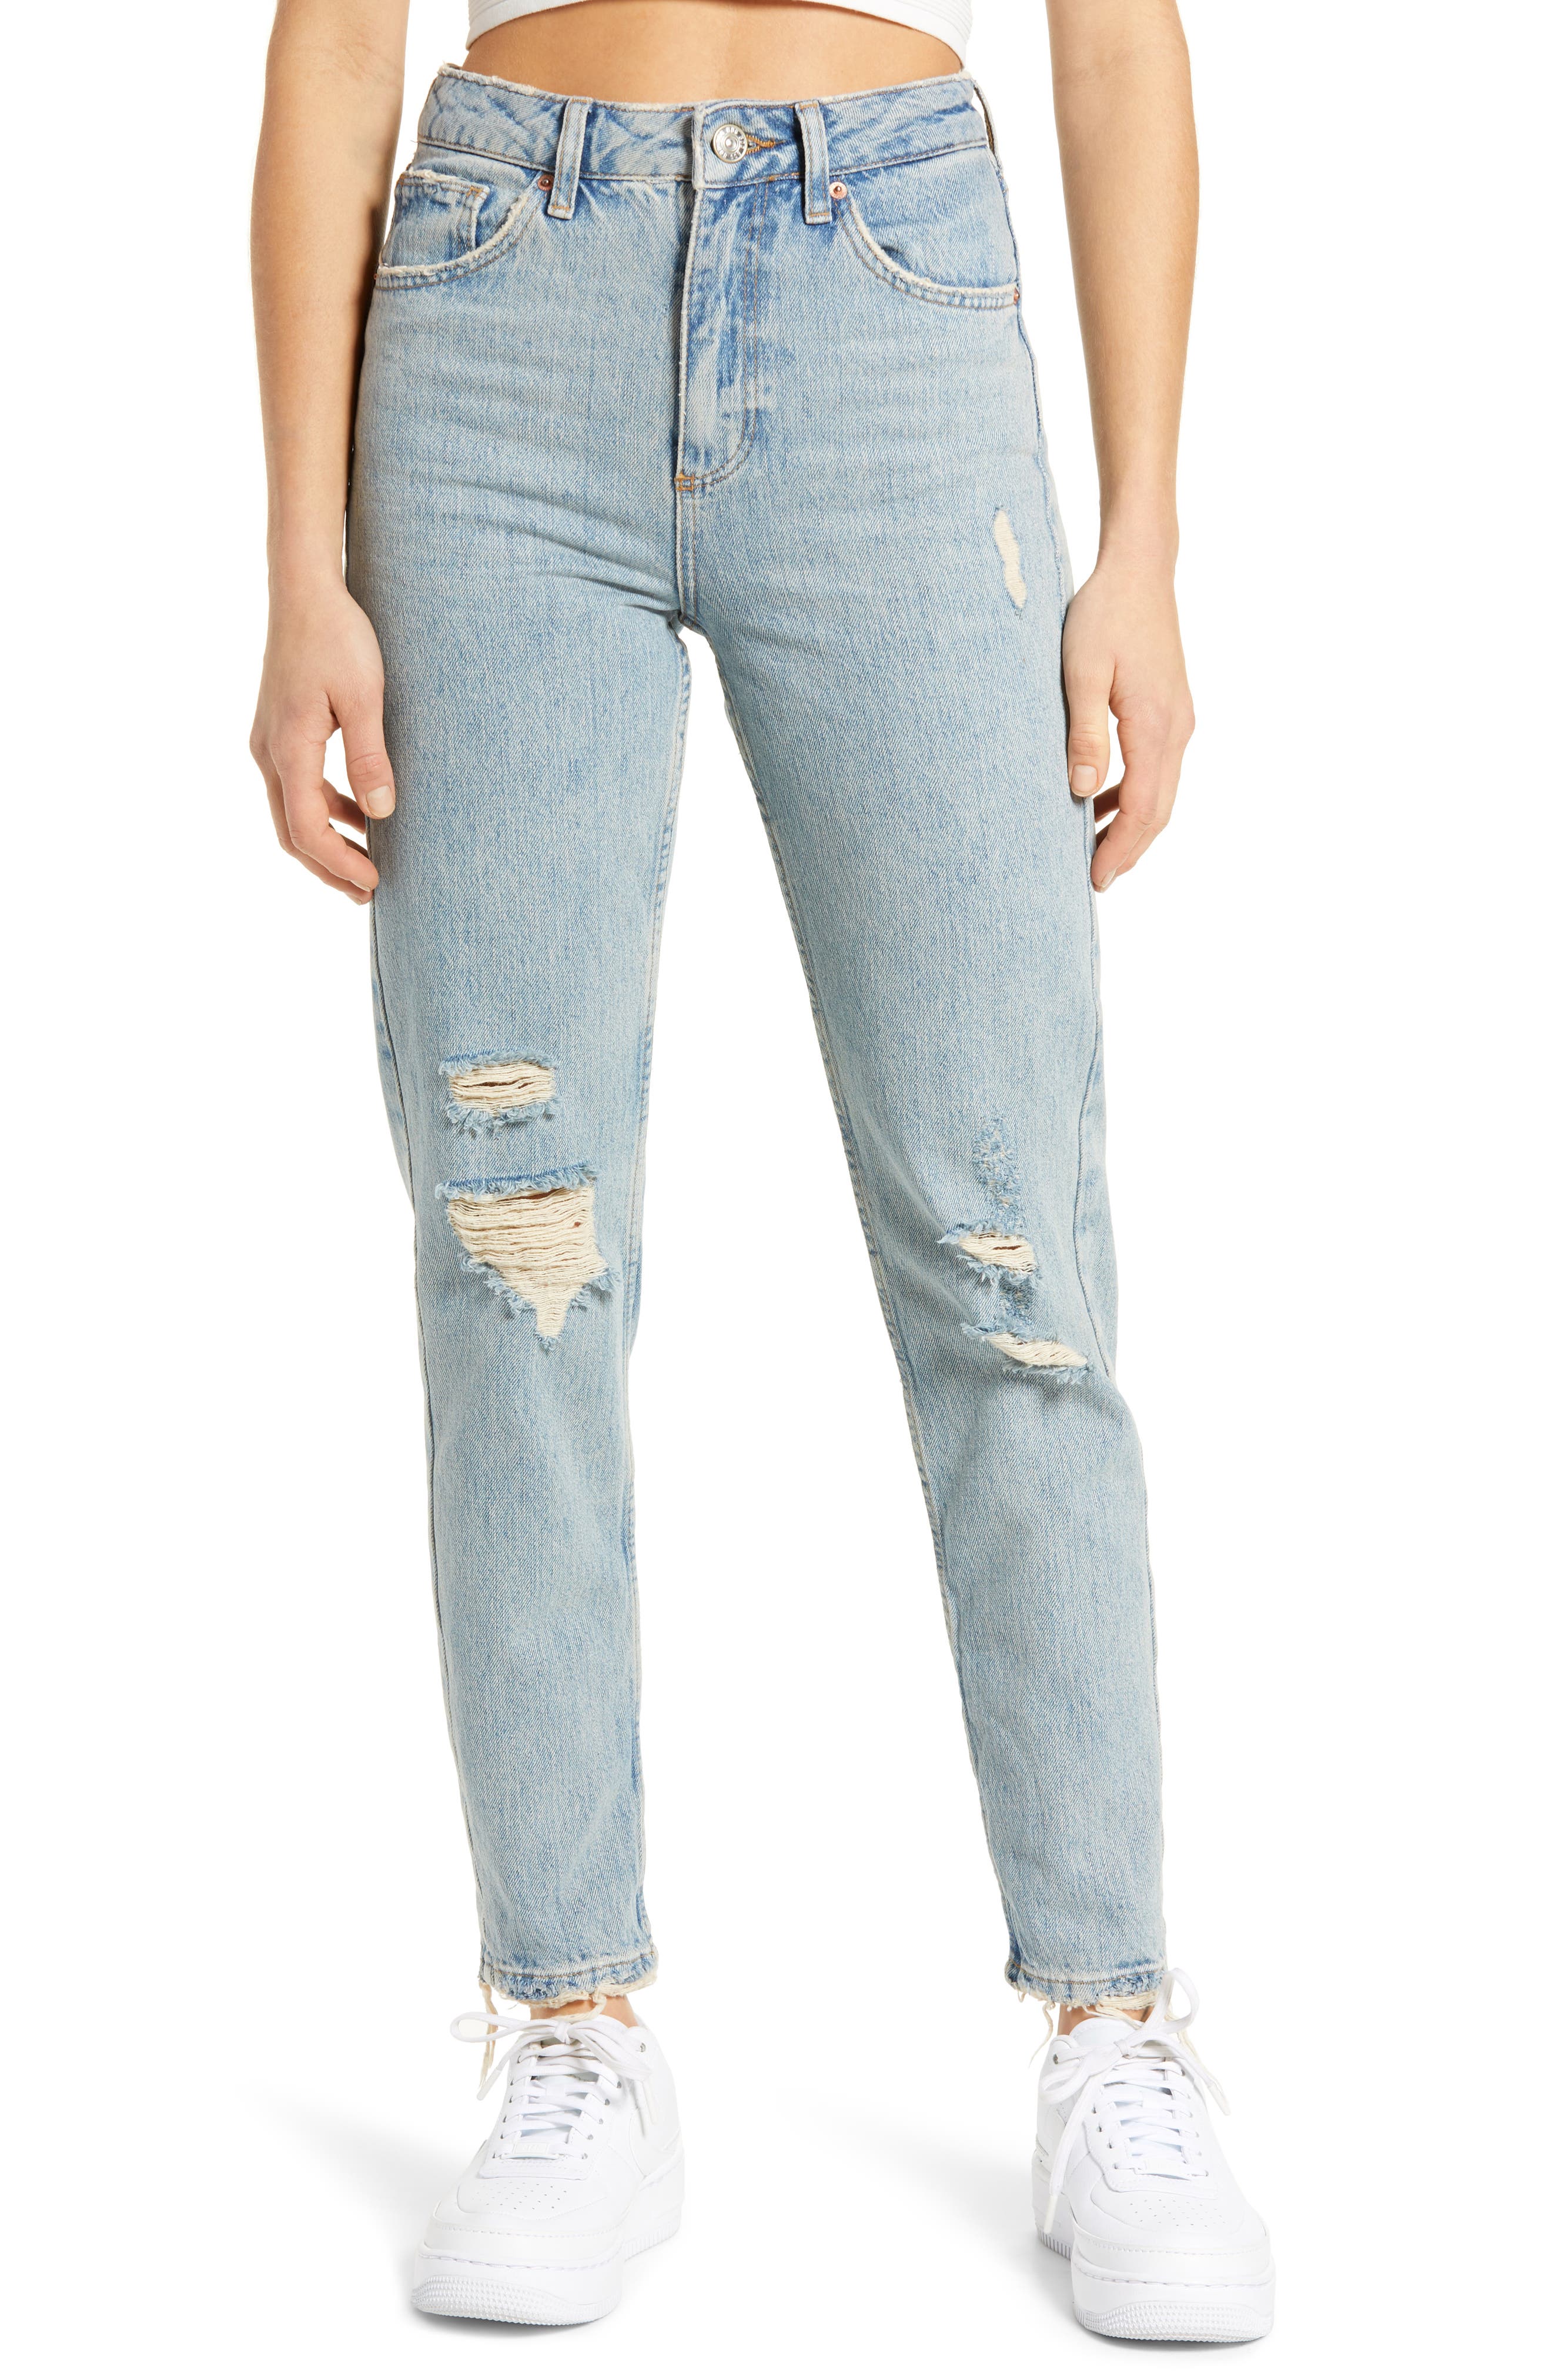 urban outfitters black ripped jeans